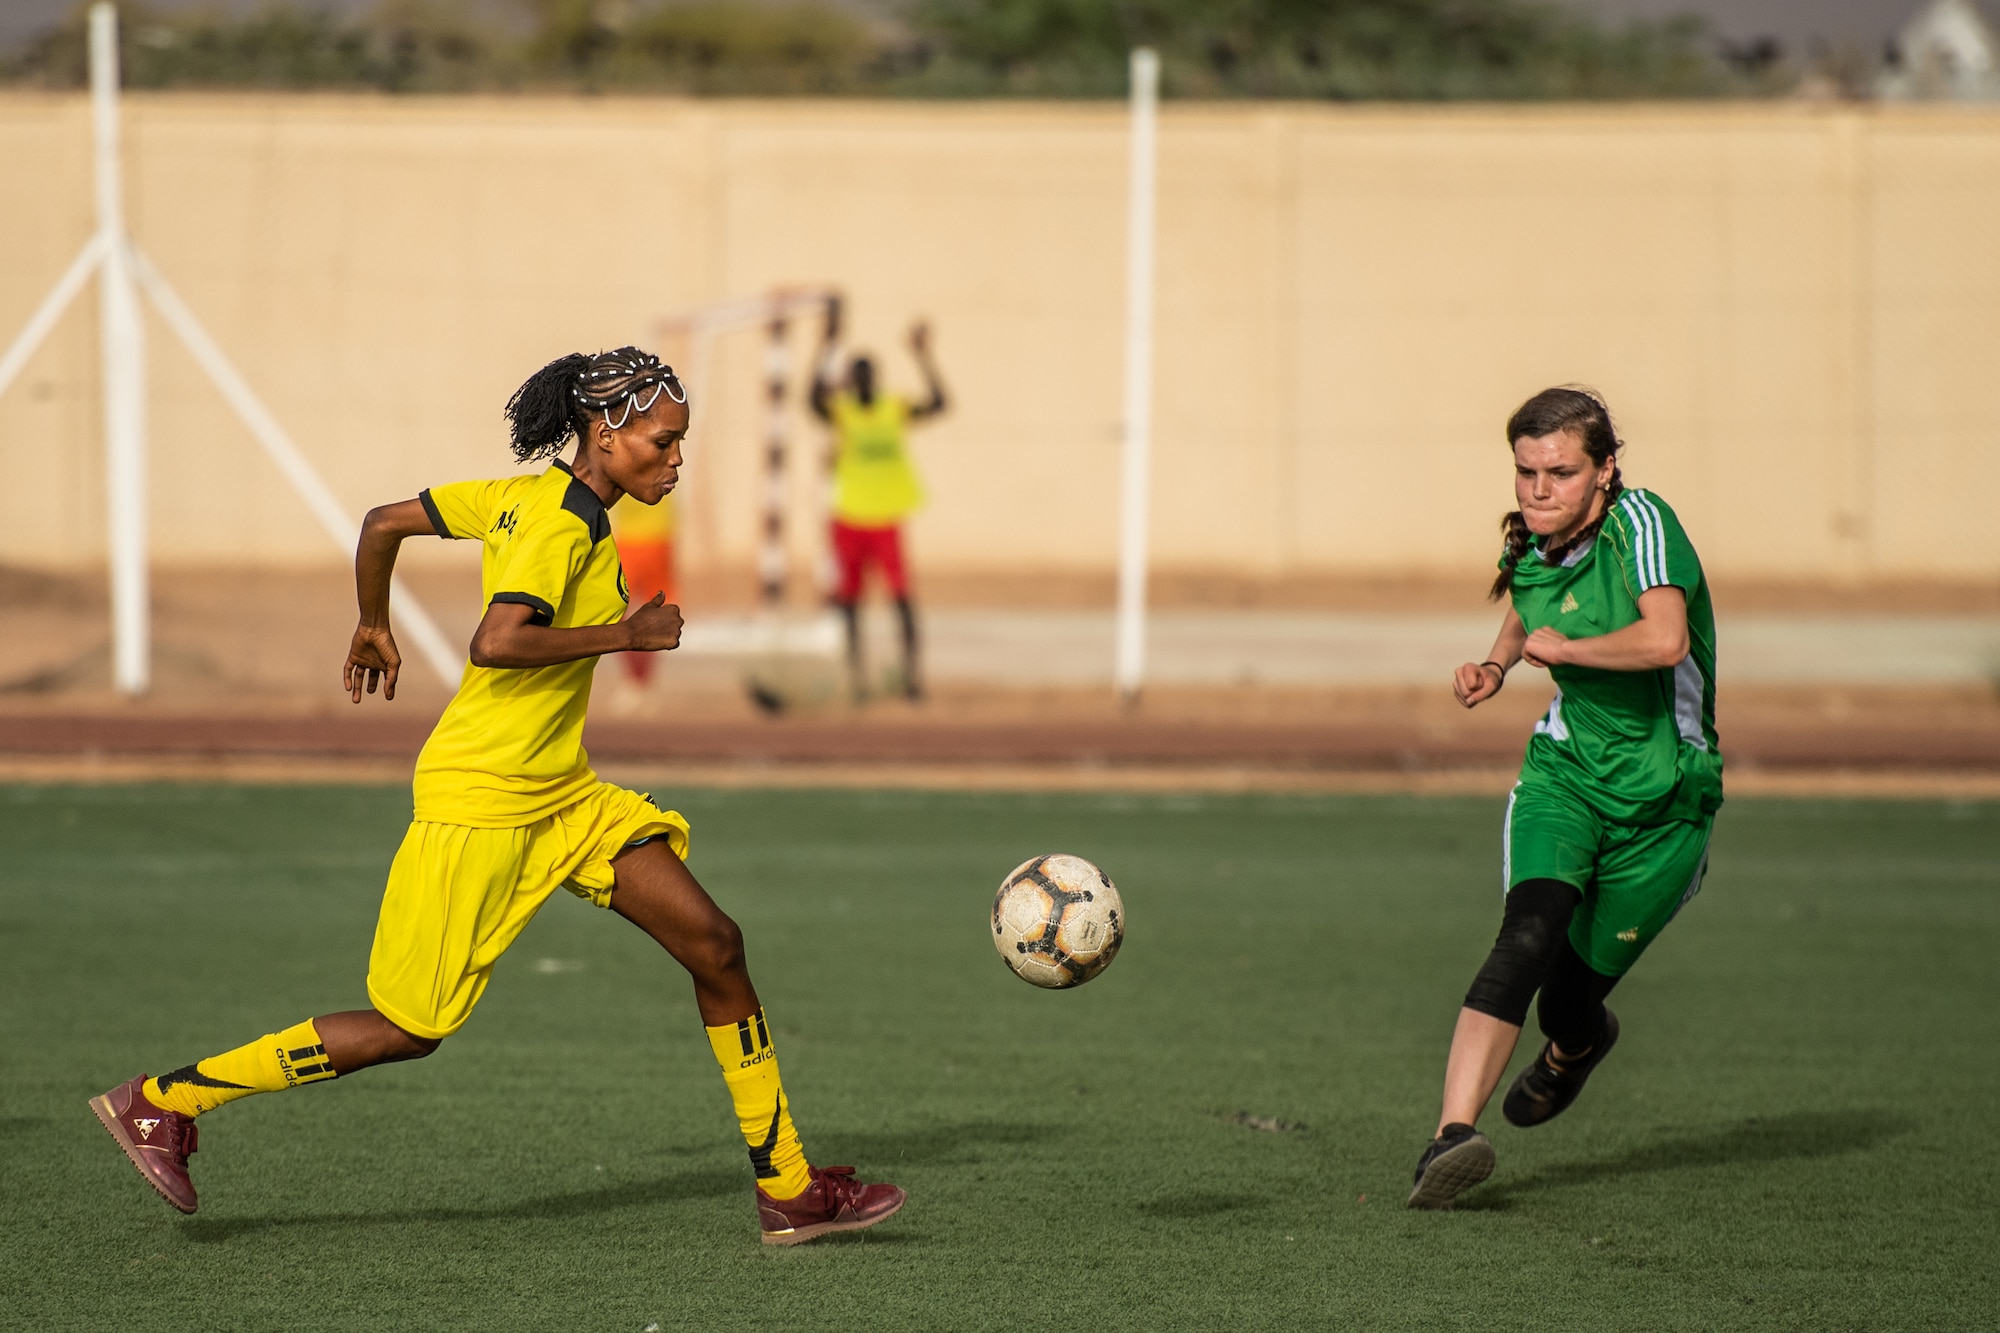 A player from the Nassara Athletic Club Women’s Soccer Team, and U.S. Air Force Airman 1st Class Hannah Stublar 31st Expeditionary Red Horse Squadron member, rush to the ball during a recreational game between Nigerien Air Base 201 and the Nassara Athletic Club Women’s Soccer Team at the Agadez Sports Stadium in Agadez, Niger, July 5, 2019. The civil affairs team held the game to build rapport and promote positive sentiment between the local community and AB 201 personnel. (U.S. Air Force photo by Staff Sgt. Devin Boyer)